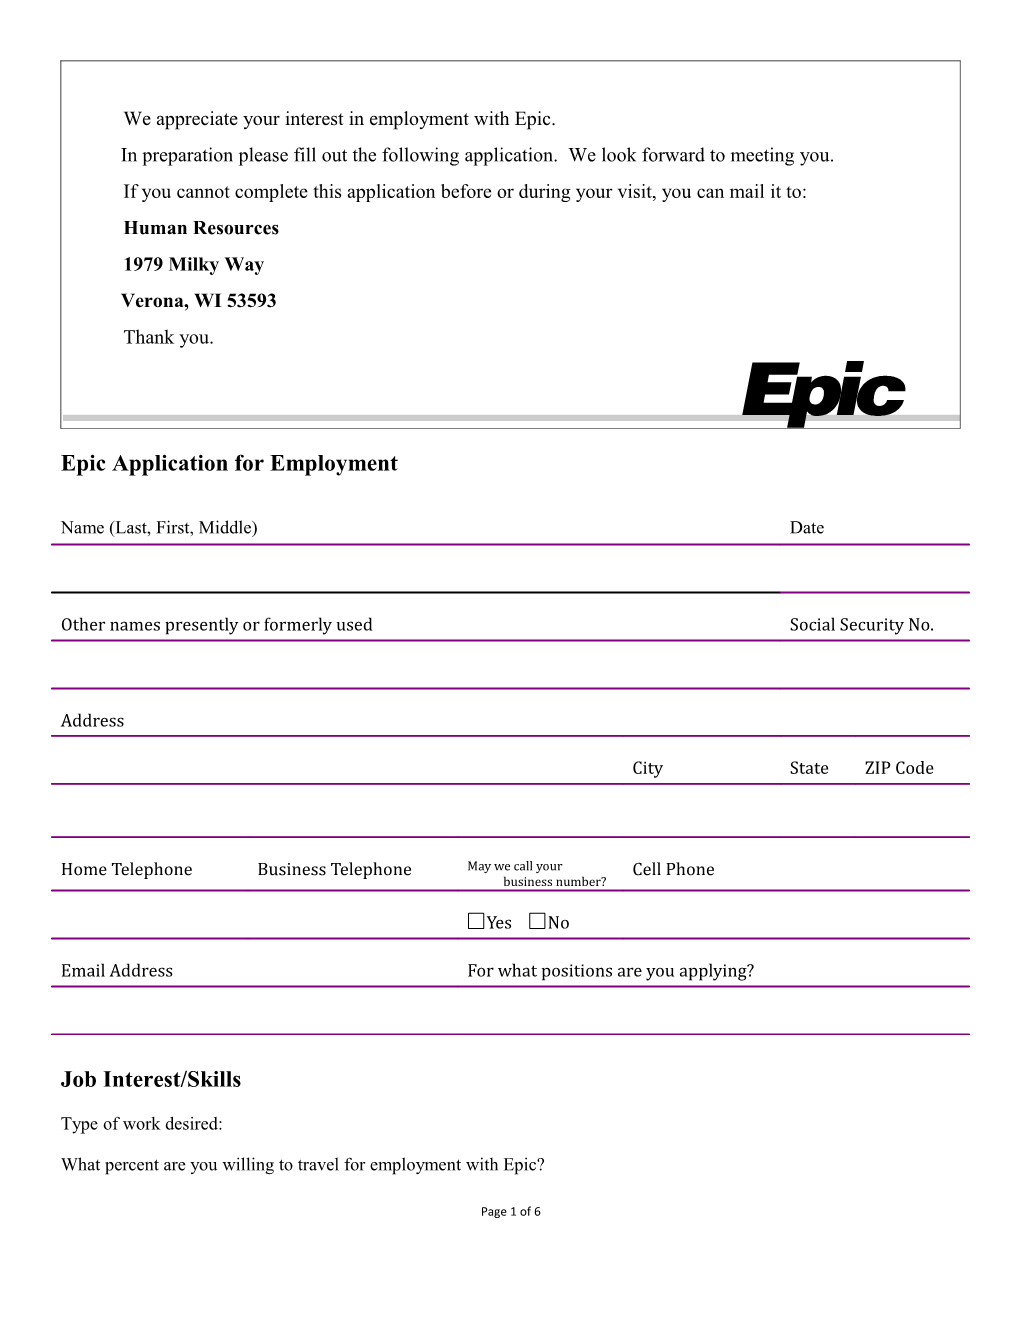 We Appreciate Your Interest in Employment with Epic